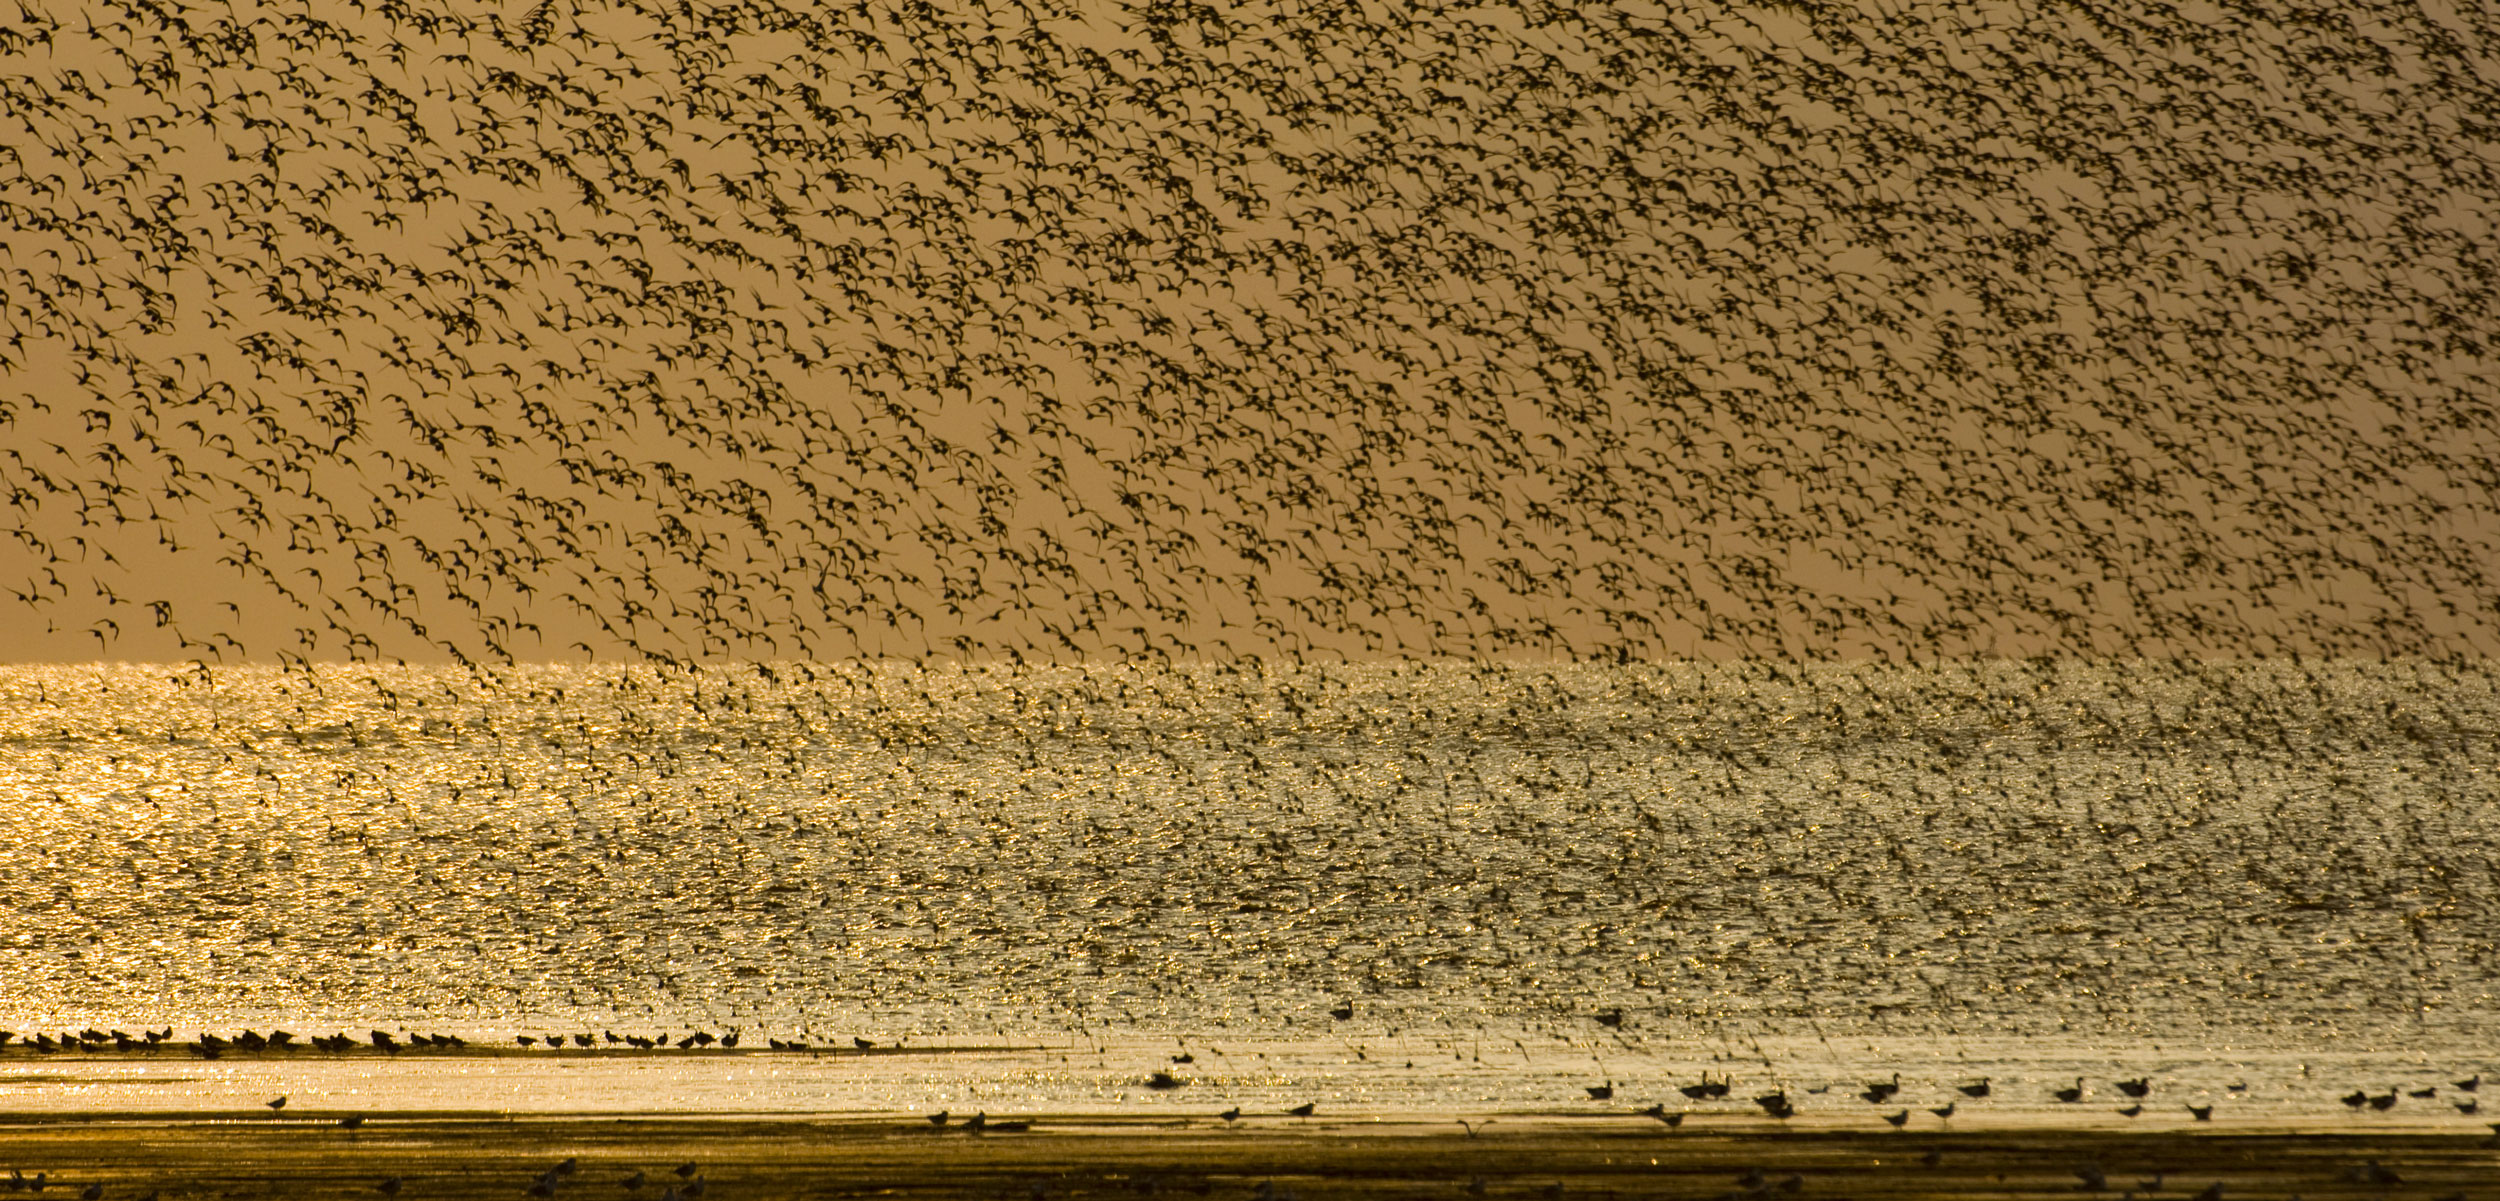 A flock of red knots takes flight over mudflats